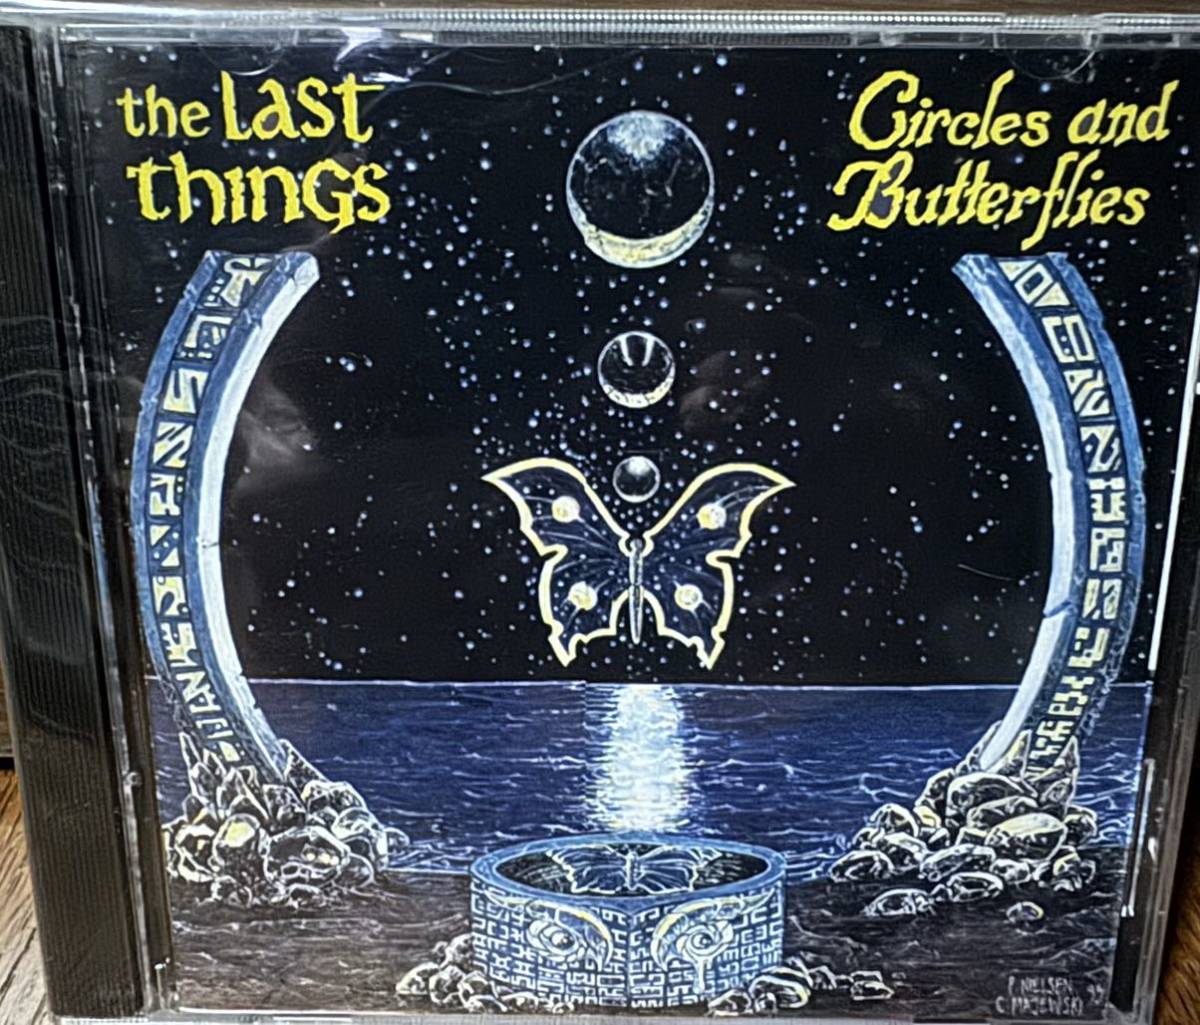 Last Things Circles & Butterflies 1993年プログレッシブメタル名盤 psychotic waltz fates warning sieges even mekong deltaの画像1